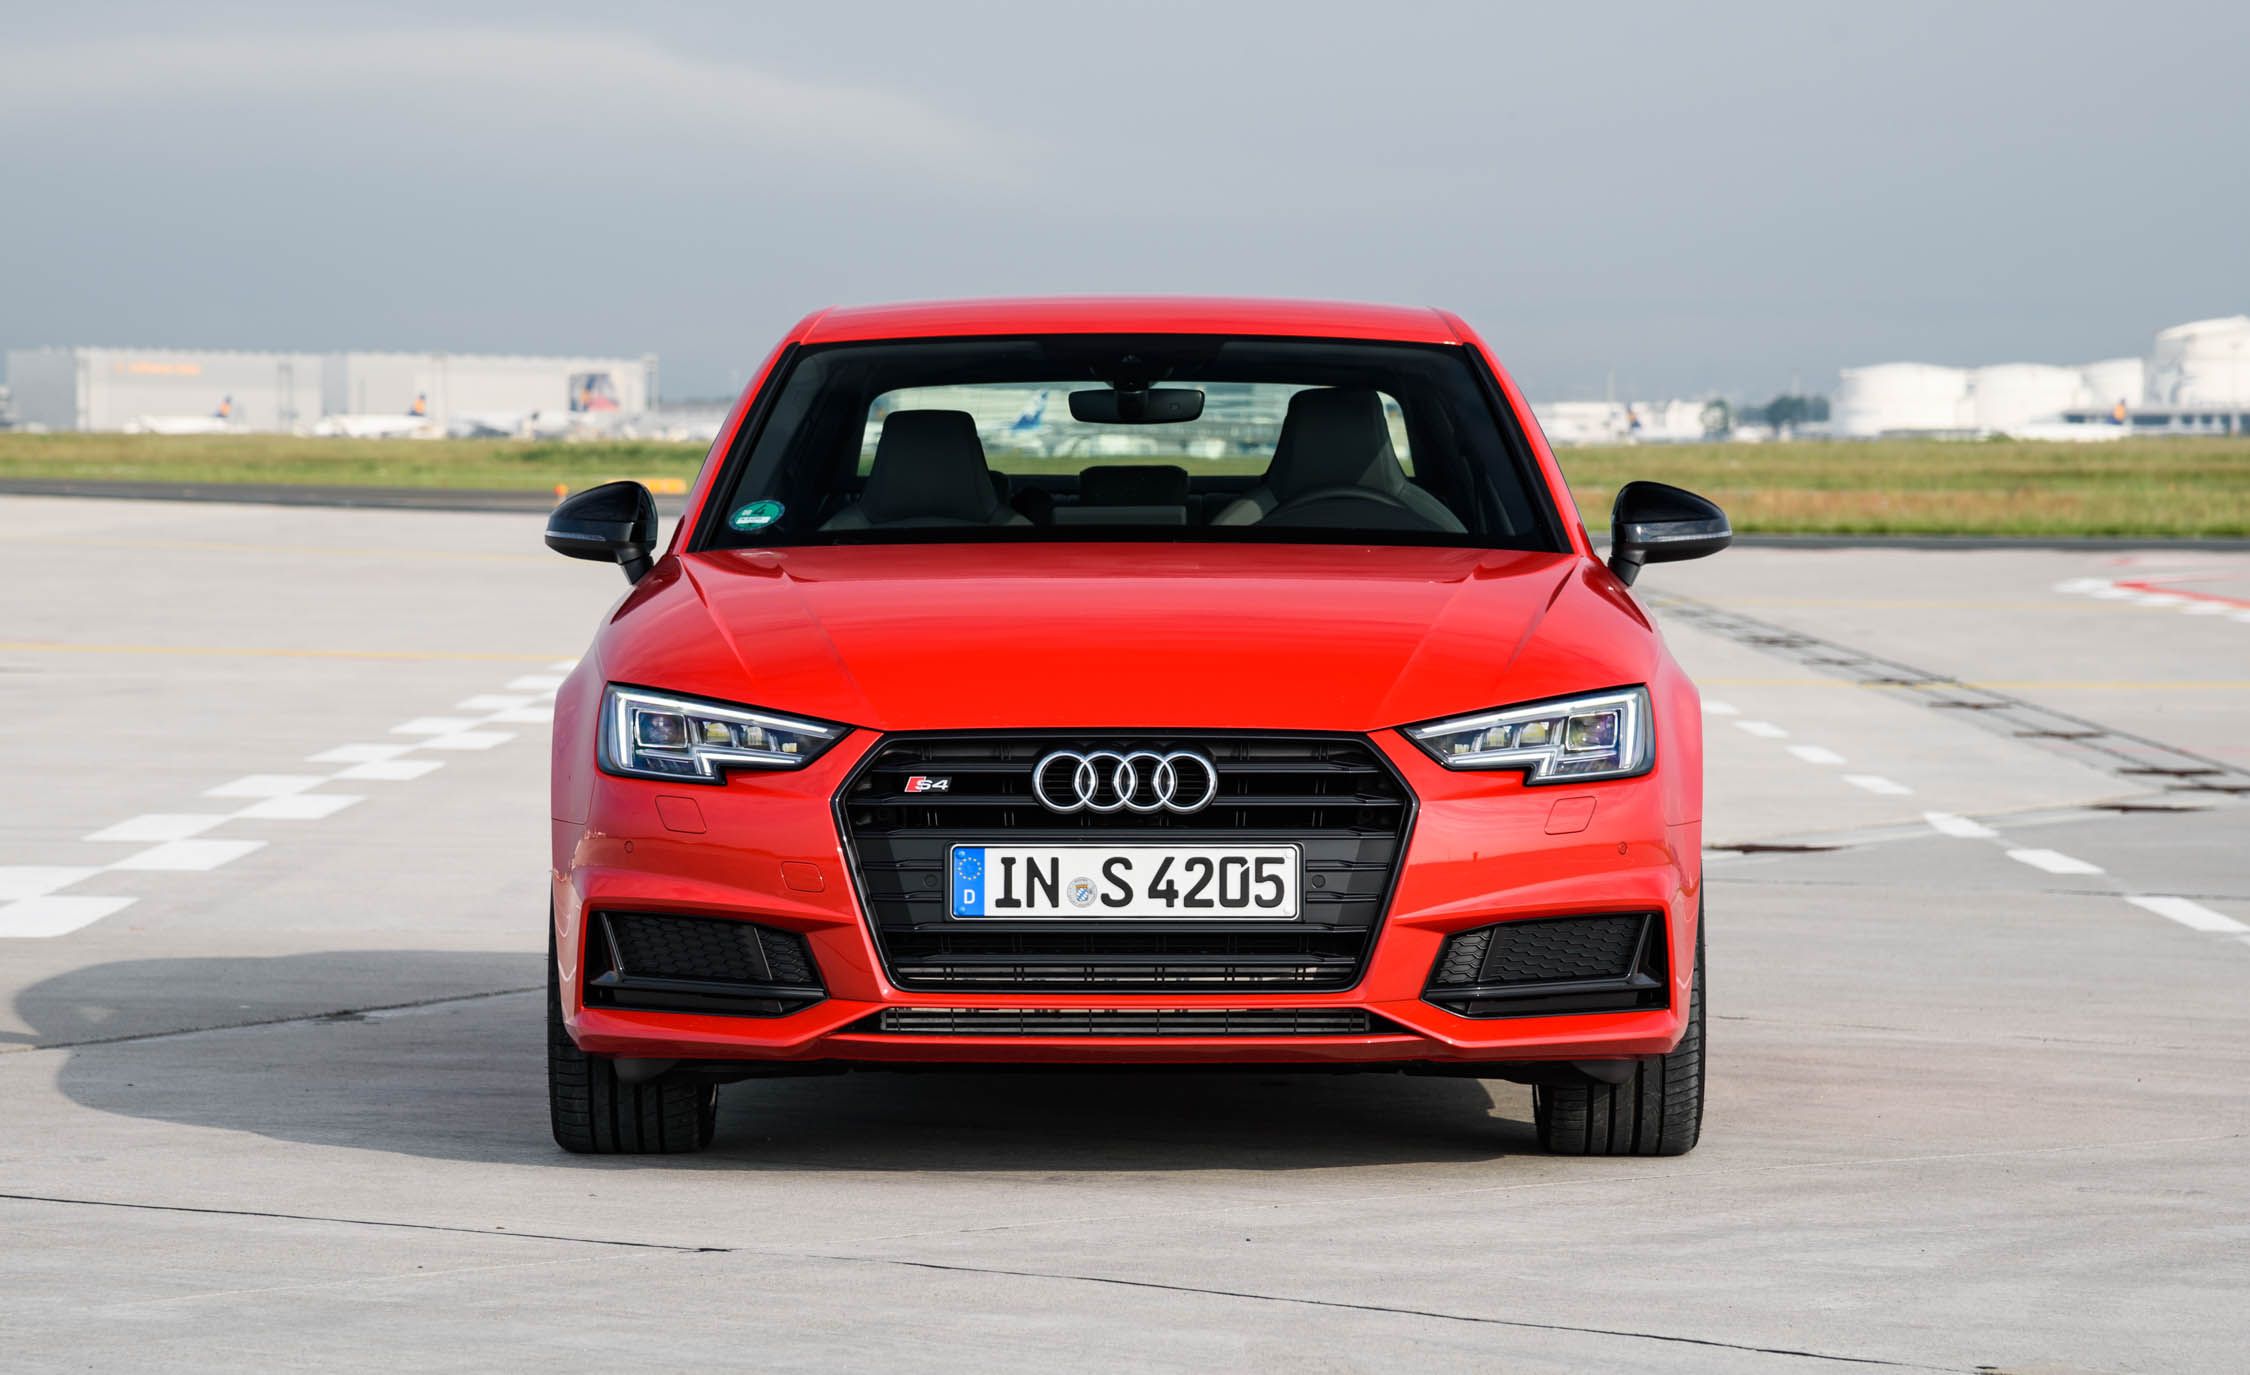 2018 Audi S4 Exterior Red Front (View 16 of 17)